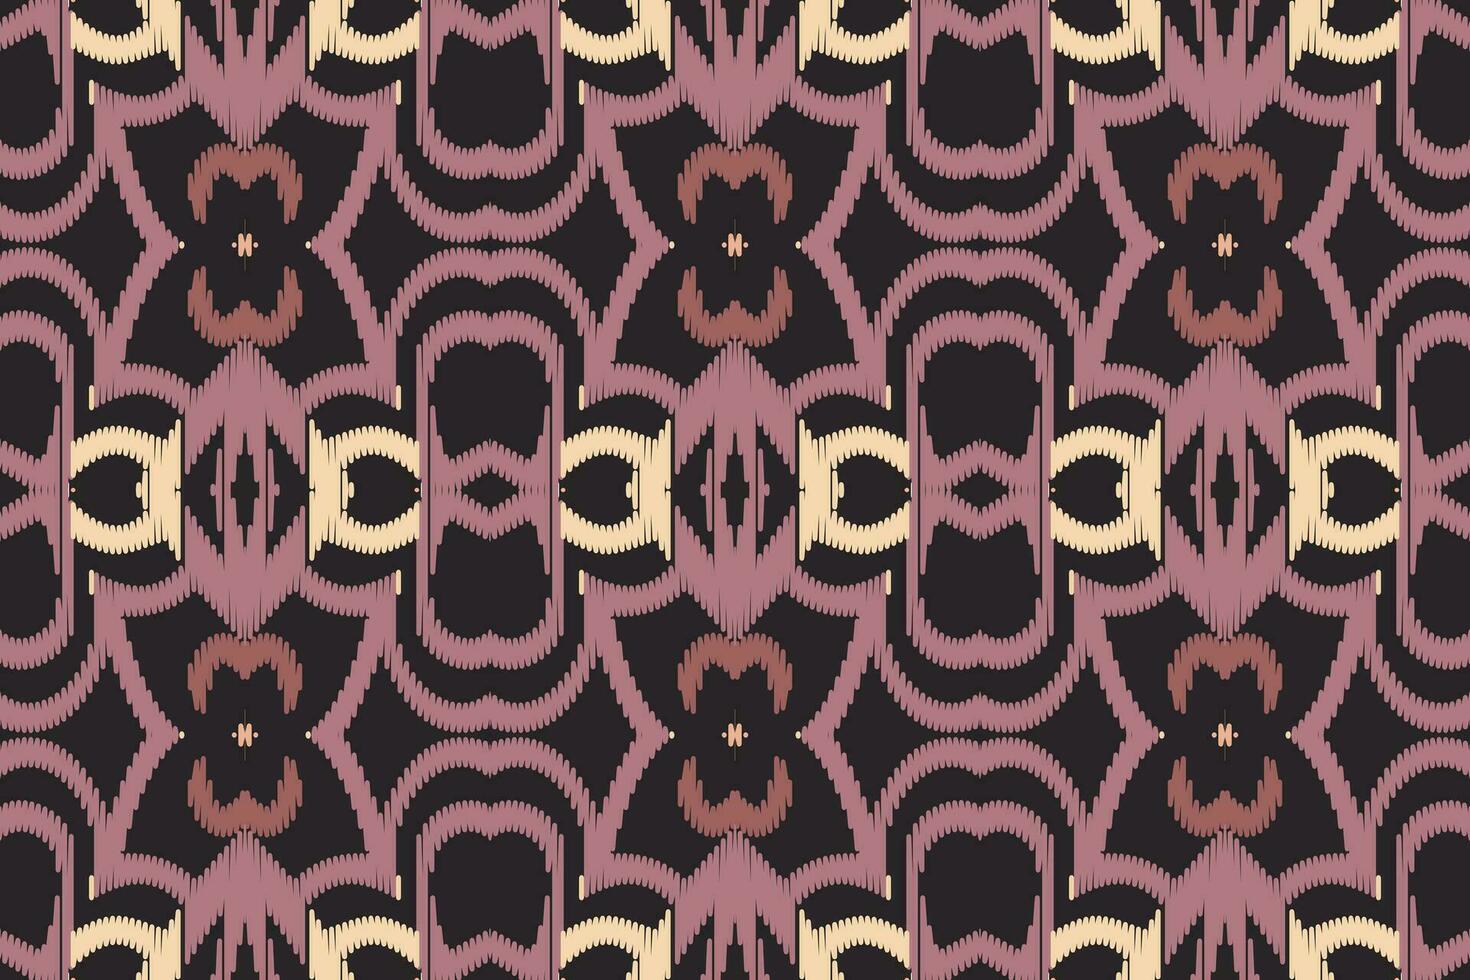 Ikat Seamless Pattern Embroidery Background. Ikat Patterns Geometric Ethnic Oriental Pattern traditional.aztec Style Abstract Vector design for Texture,fabric,clothing,wrapping,sarong.